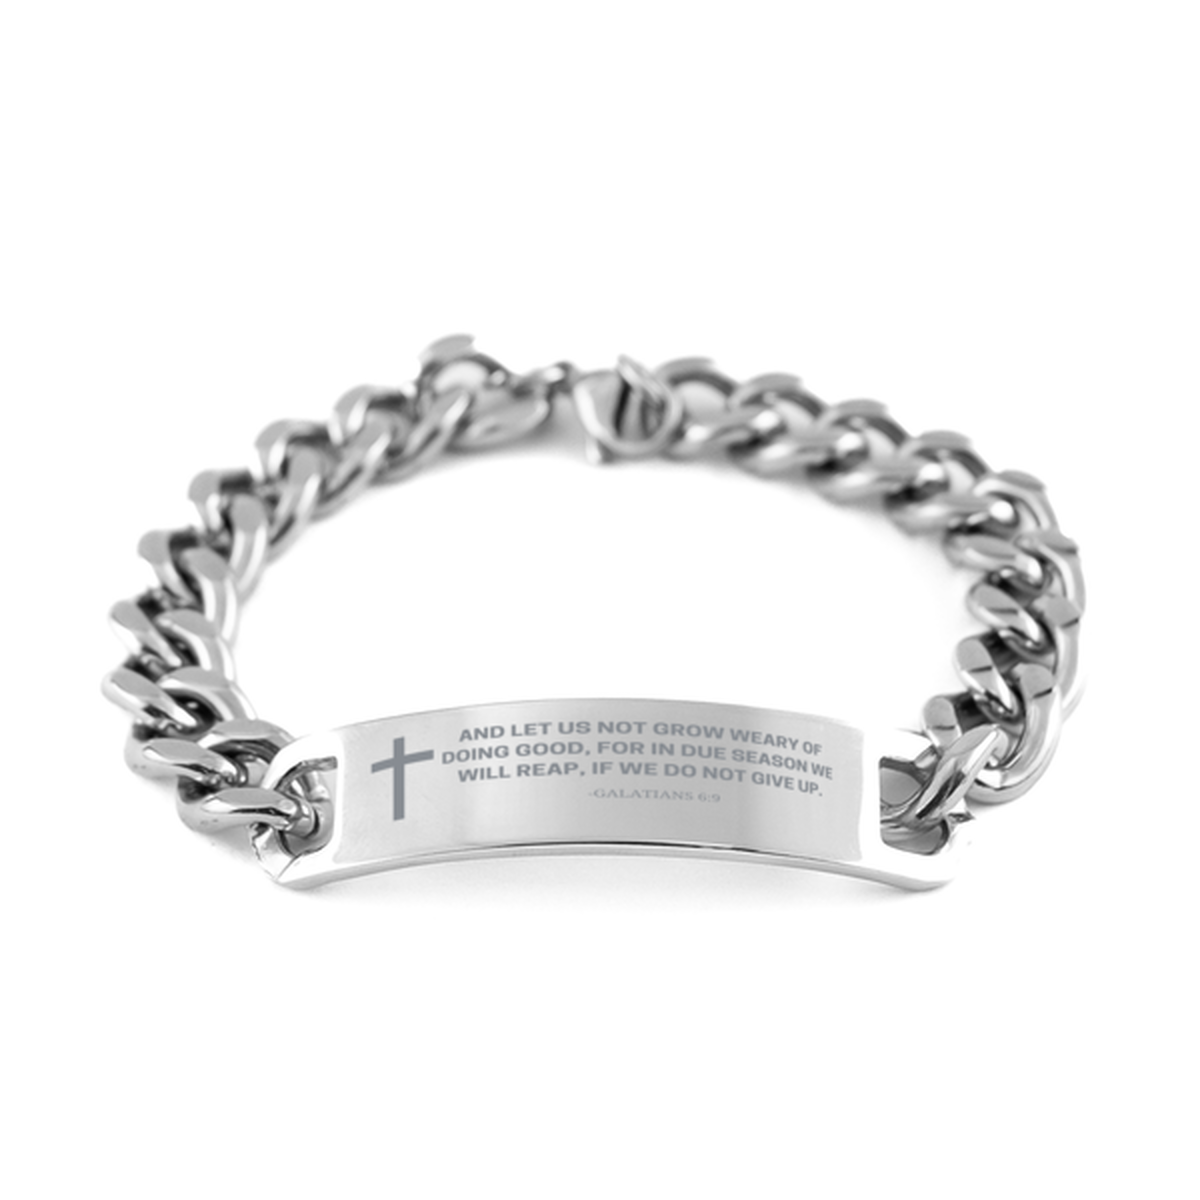 Baptism Gifts For Teenage Boys Girls, Christian Bible Verse Cuban Chain Bracelet, And let us not grow weary, Catholic Confirmation Gifts for Son, Godson, Grandson, Nephew